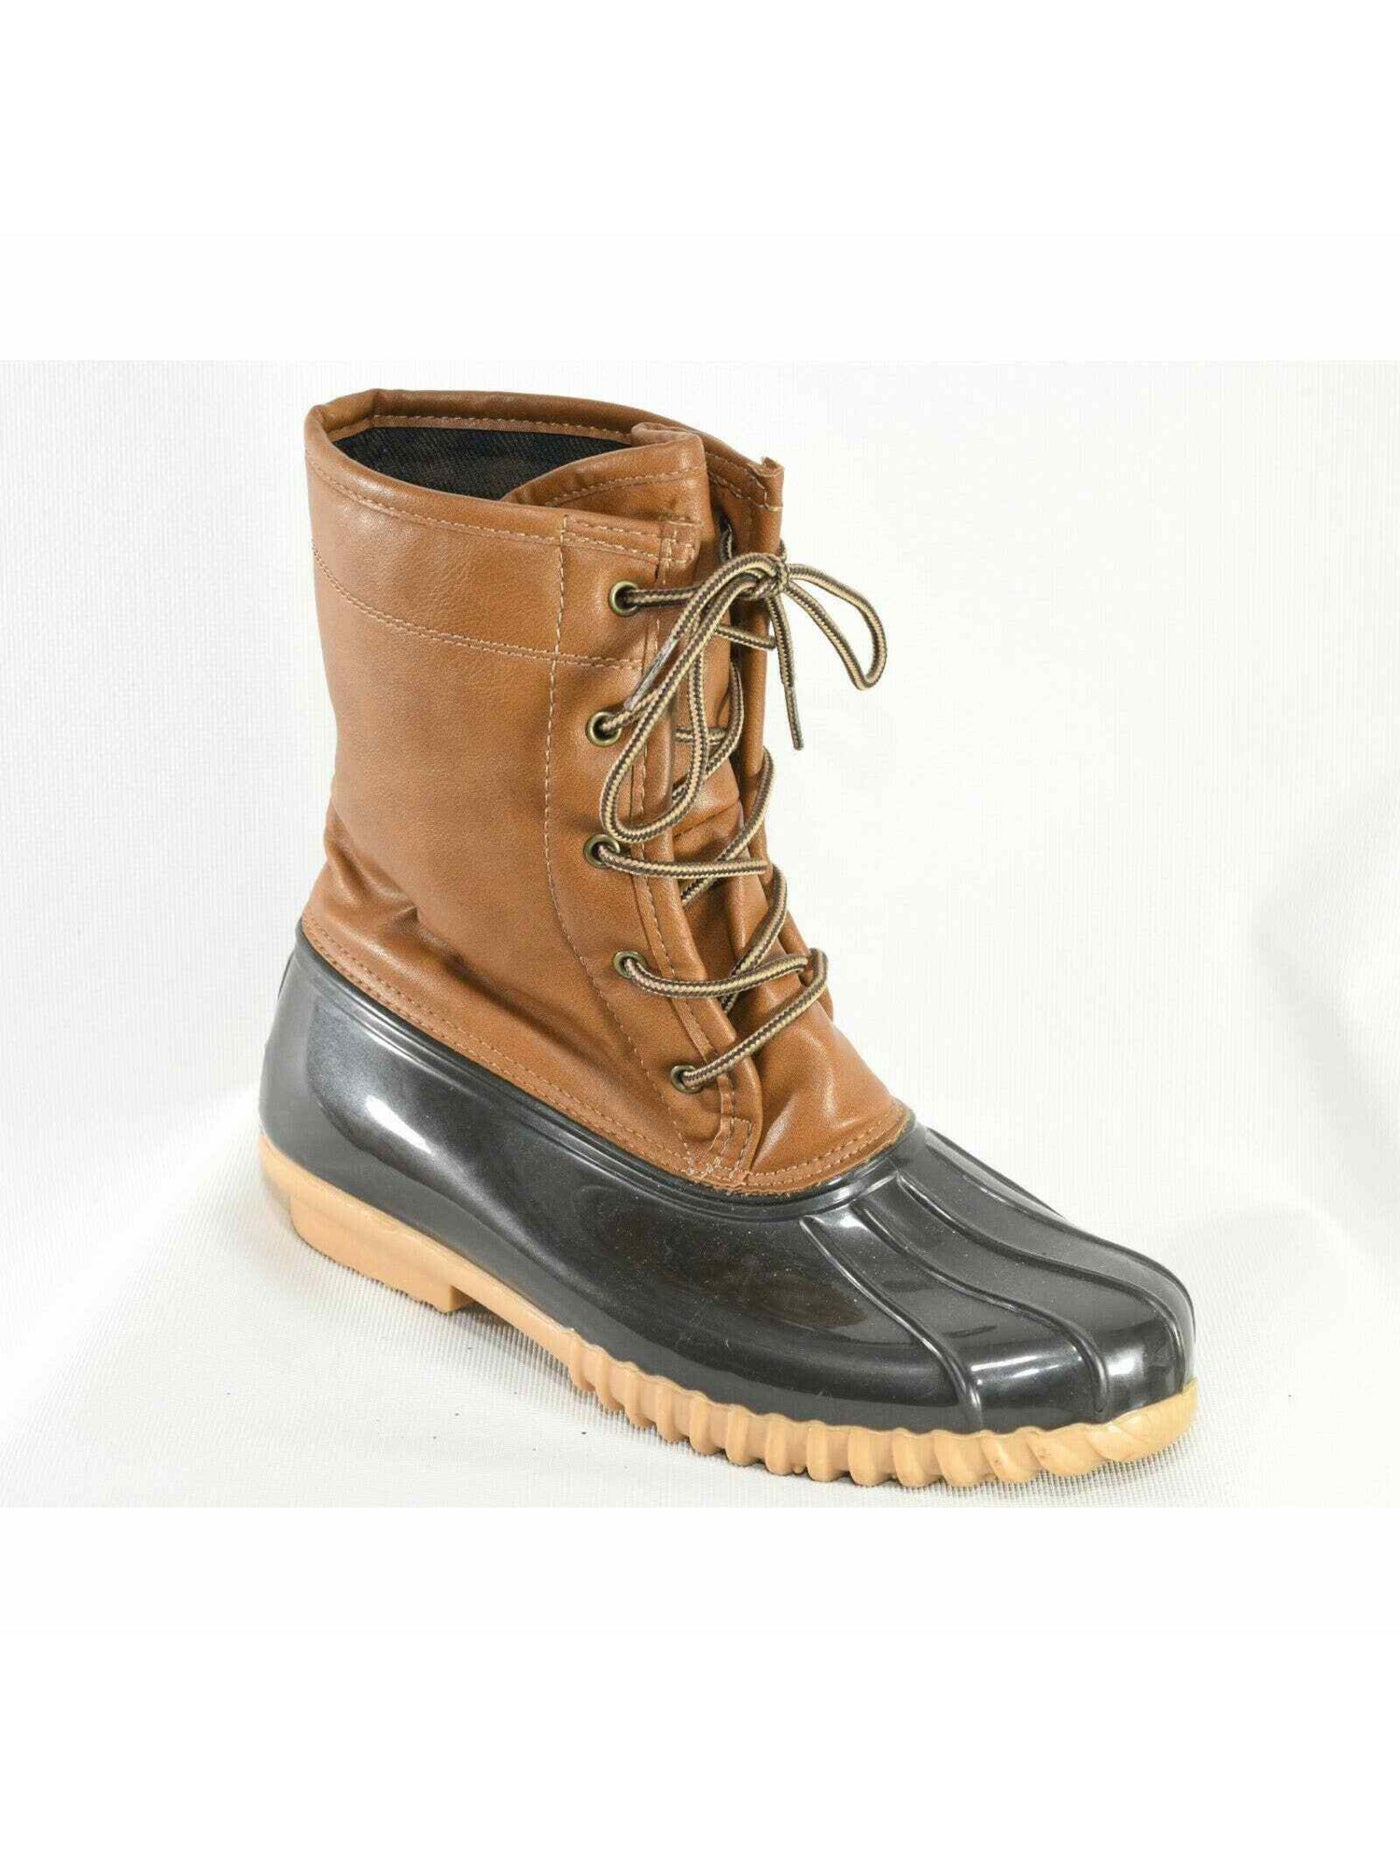 SPORTO Womens Brown Waterproof Arianna Cap Toe Lace-Up Duck Boots 7.5 M